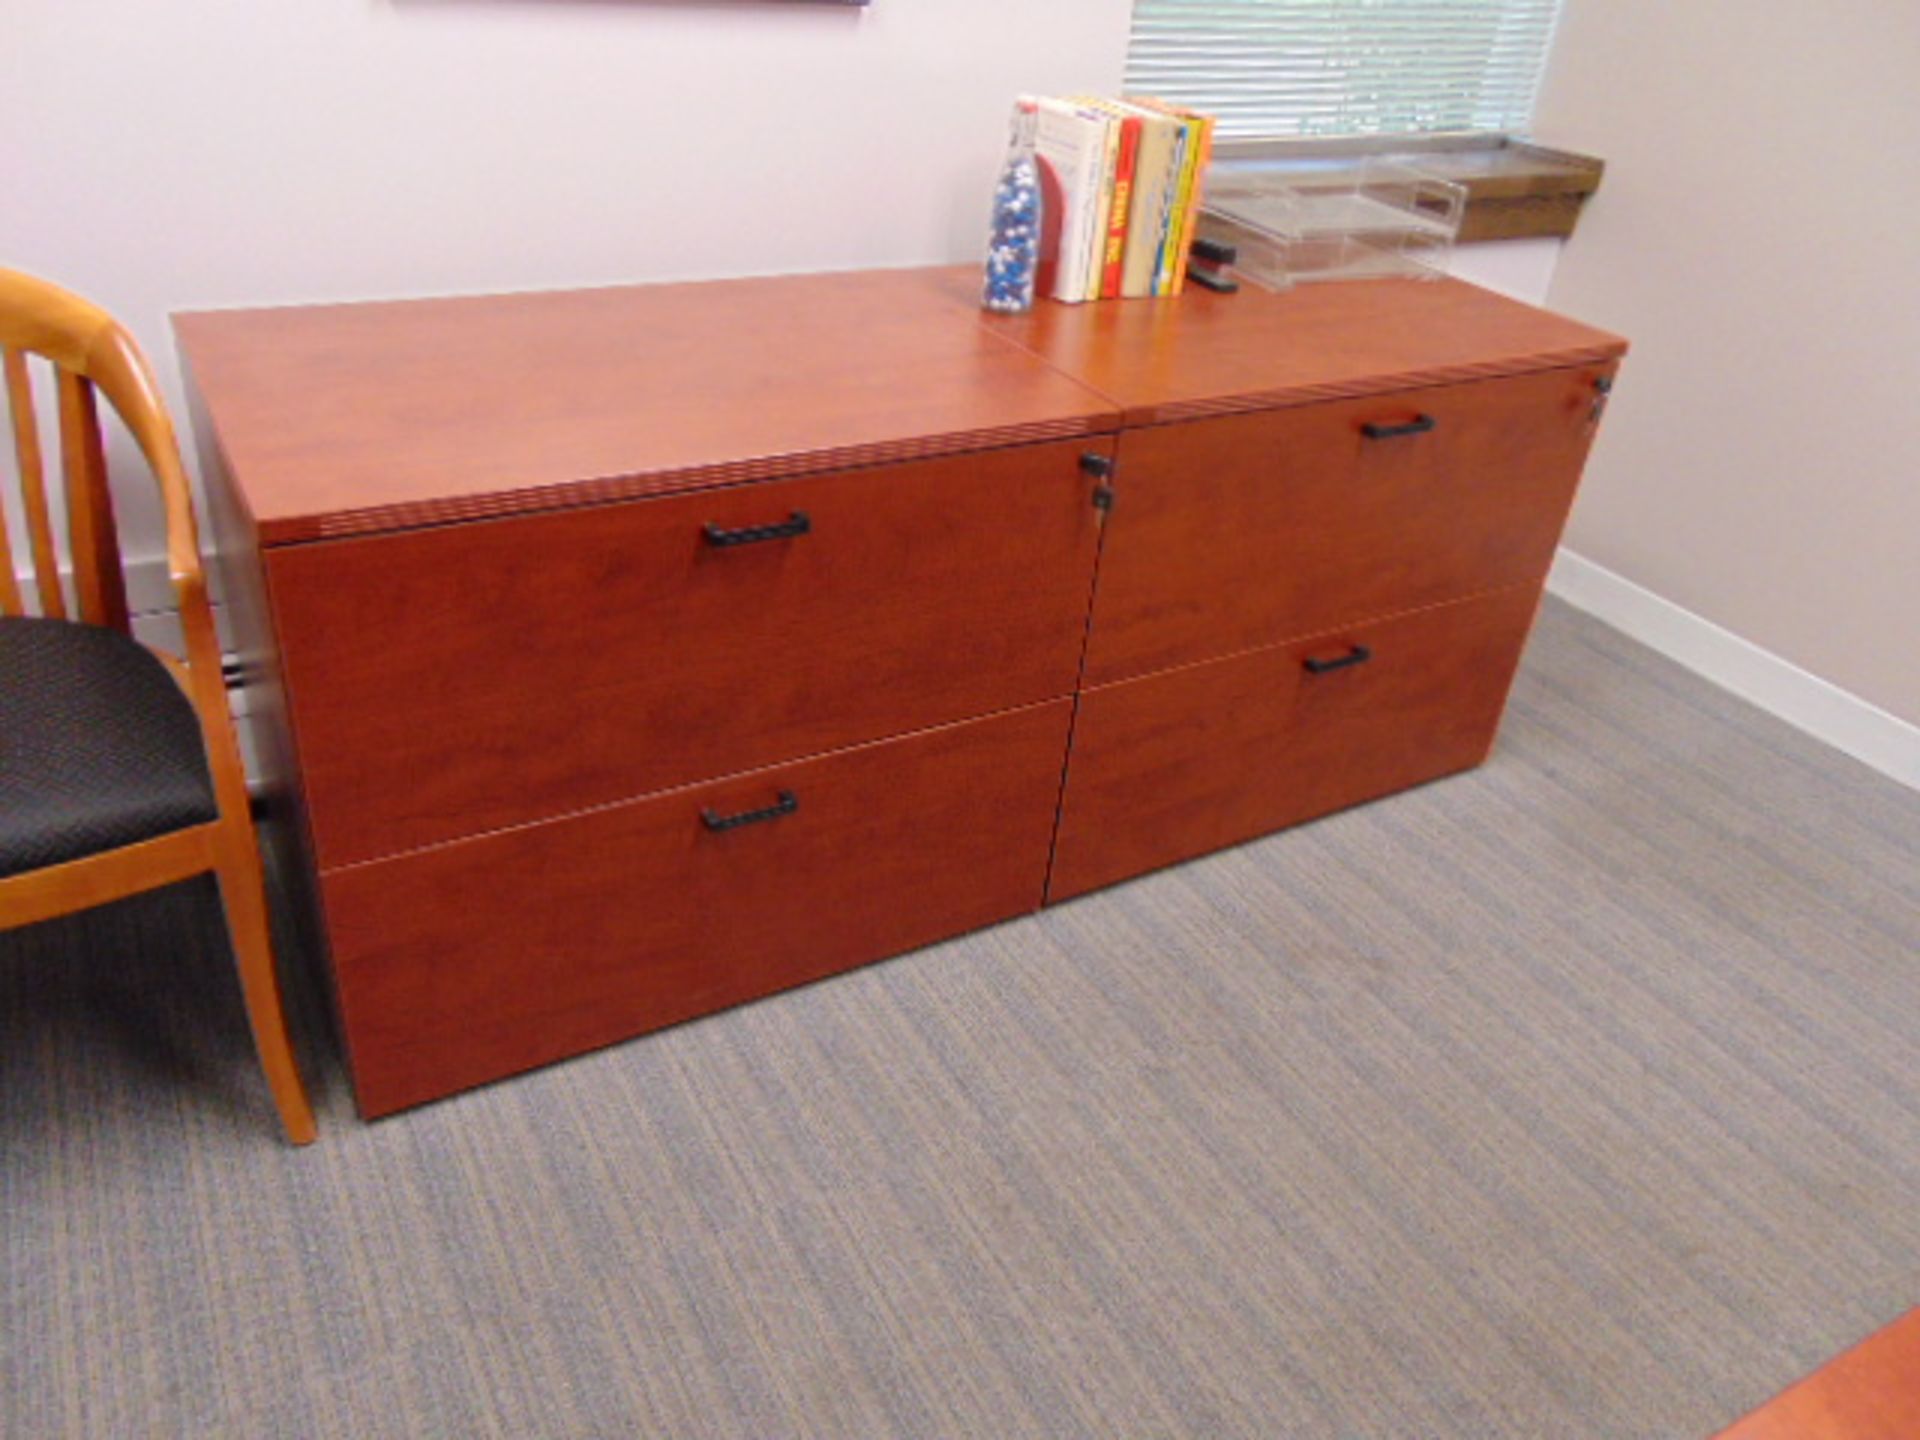 LOT CONSISTING OF: L-shaped desk, (2) file cabinets, printer & (7) chairs - Image 3 of 4